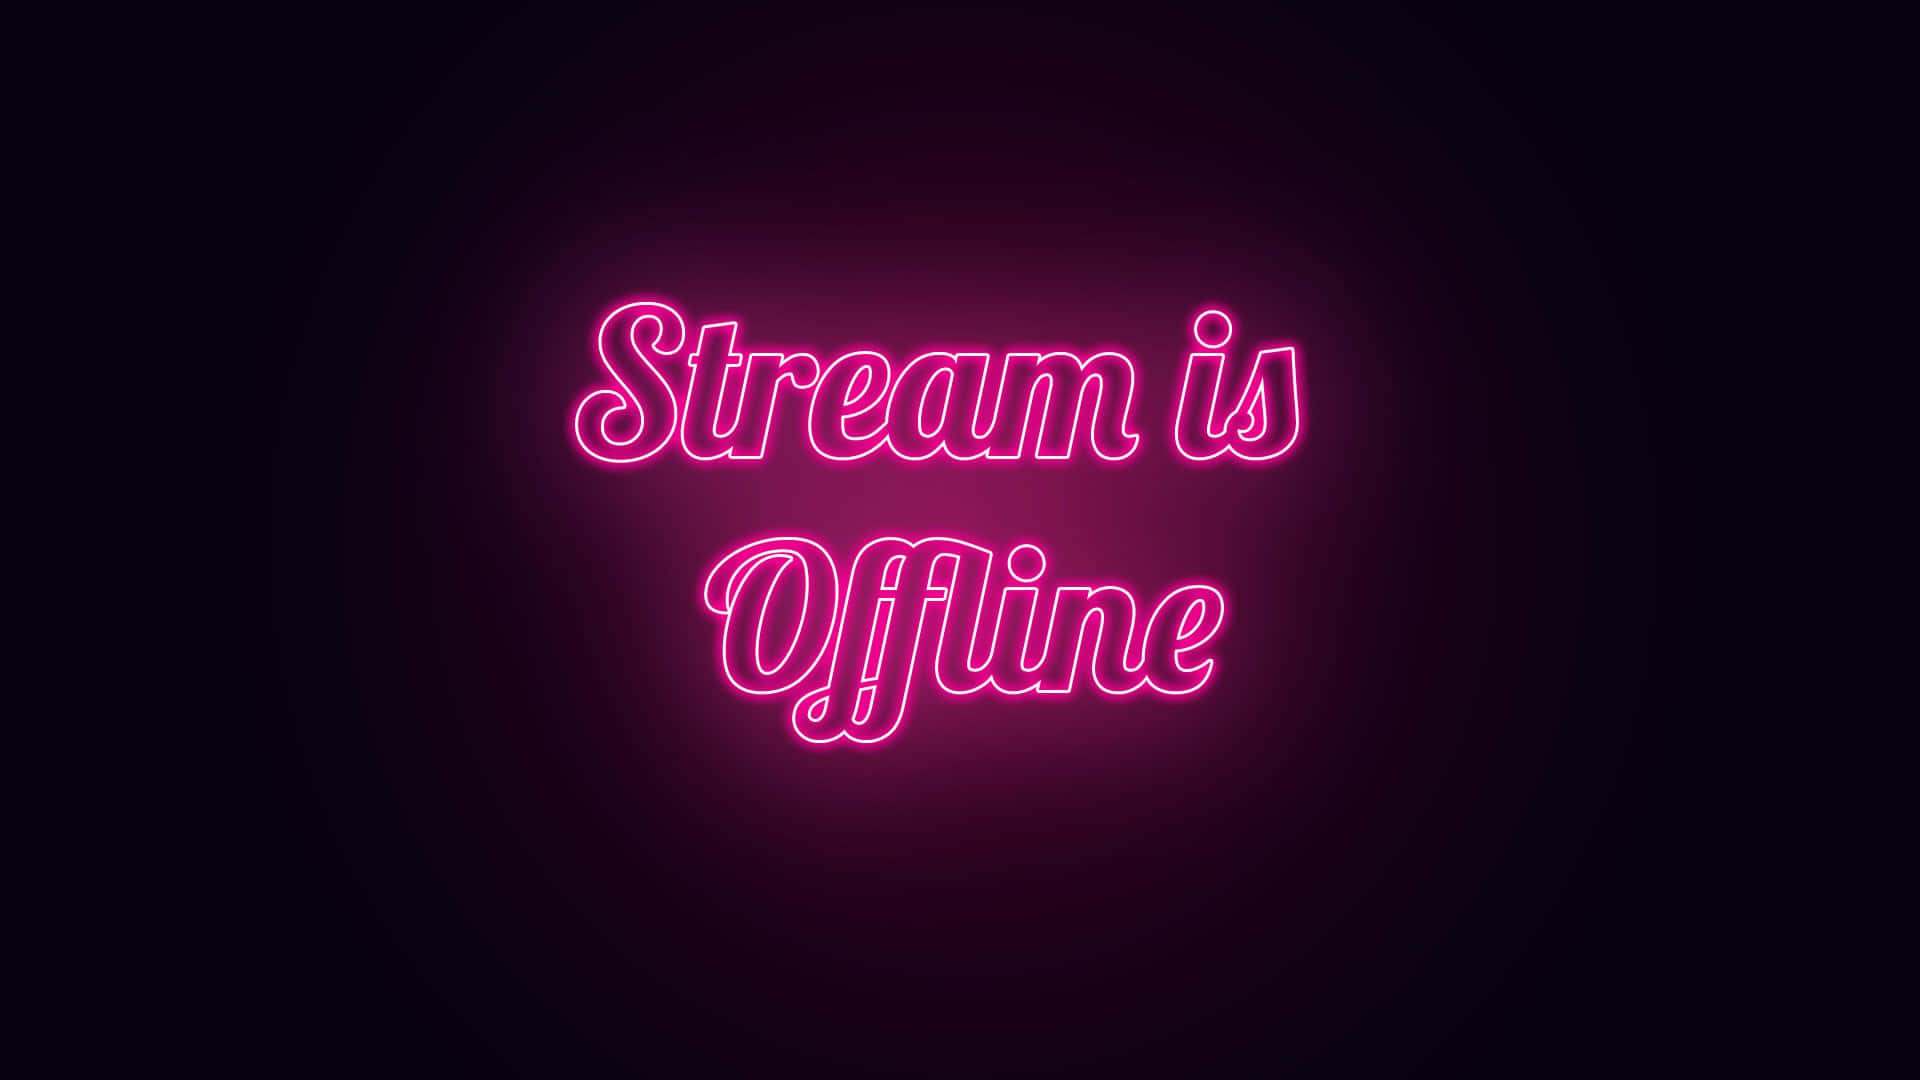 Make streaming your passion with Neon Twitch Wallpaper